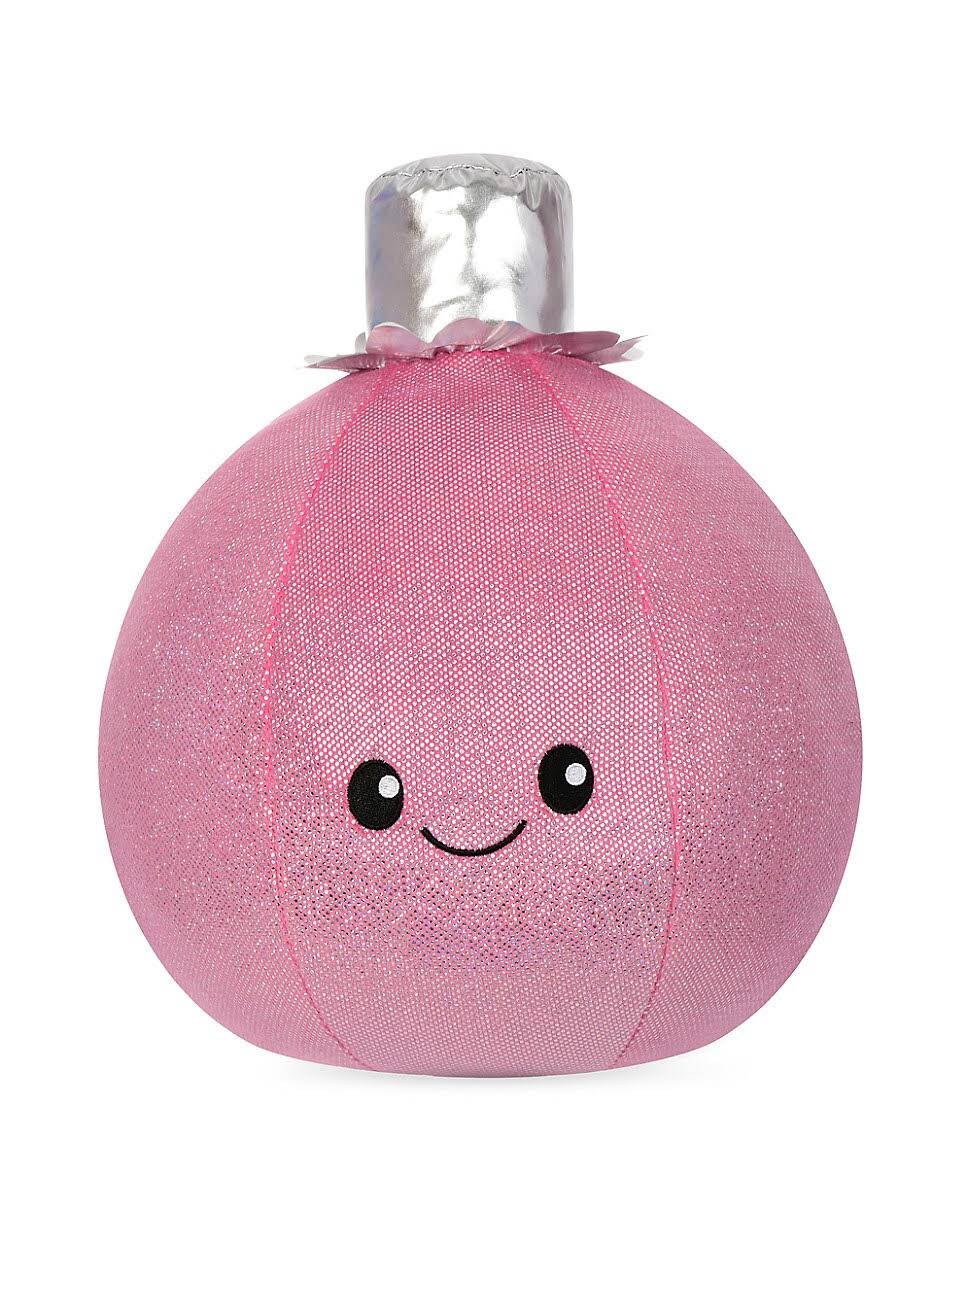 Iscream Pink Ornament Plush Toy - Pink One-Size